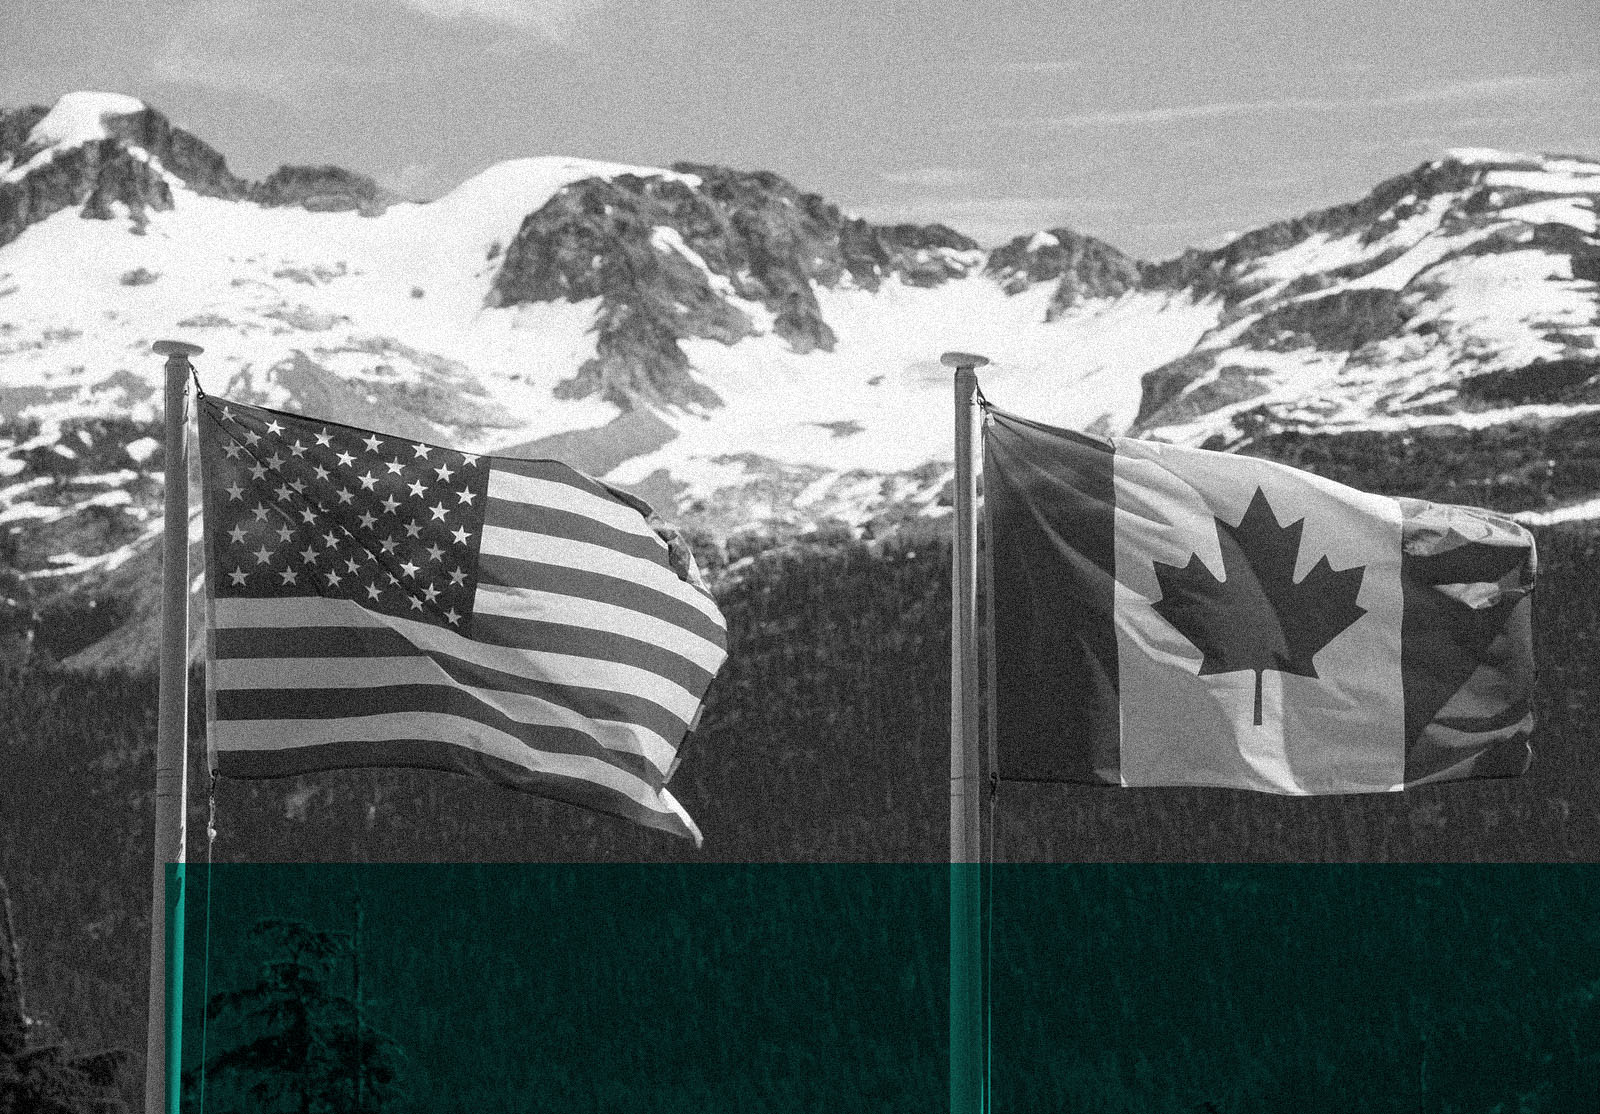 Canadian and American flags in the mountains